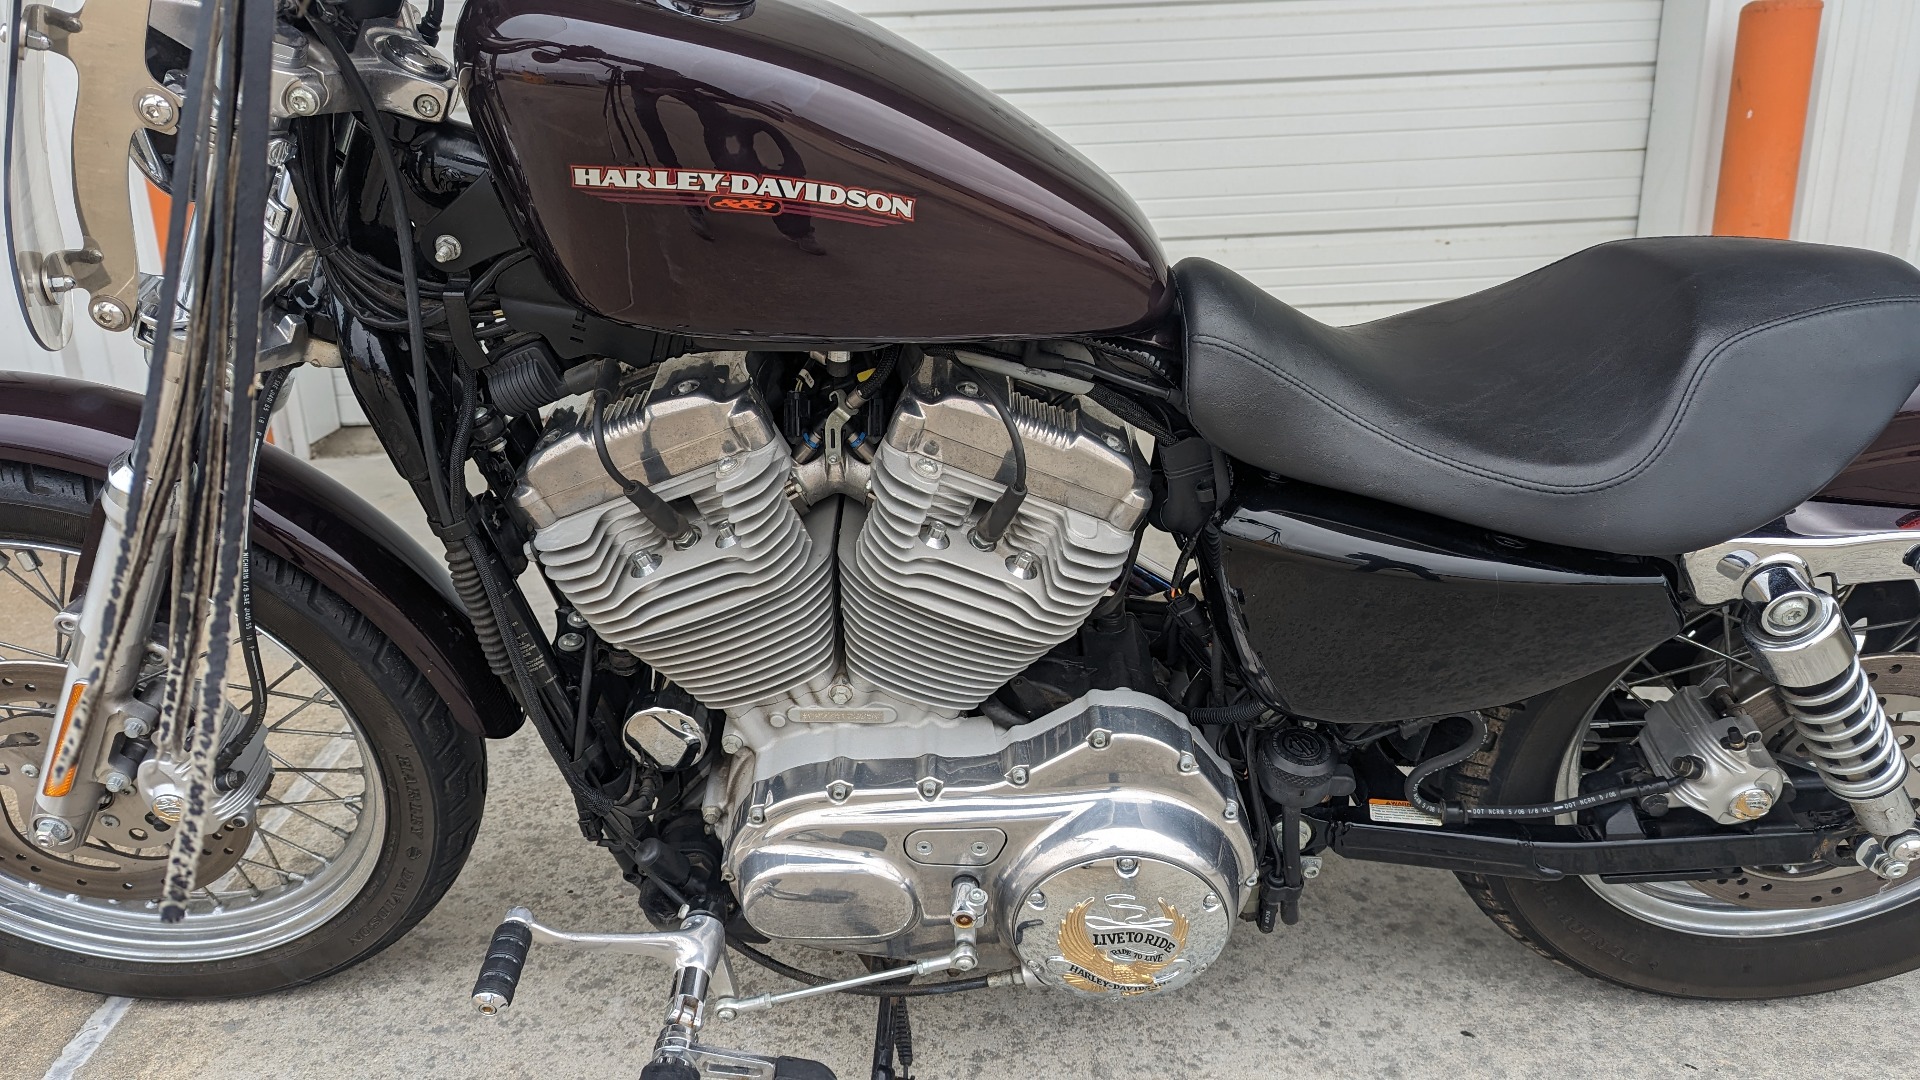 harley sportster 883 low for sale in texas - Photo 6